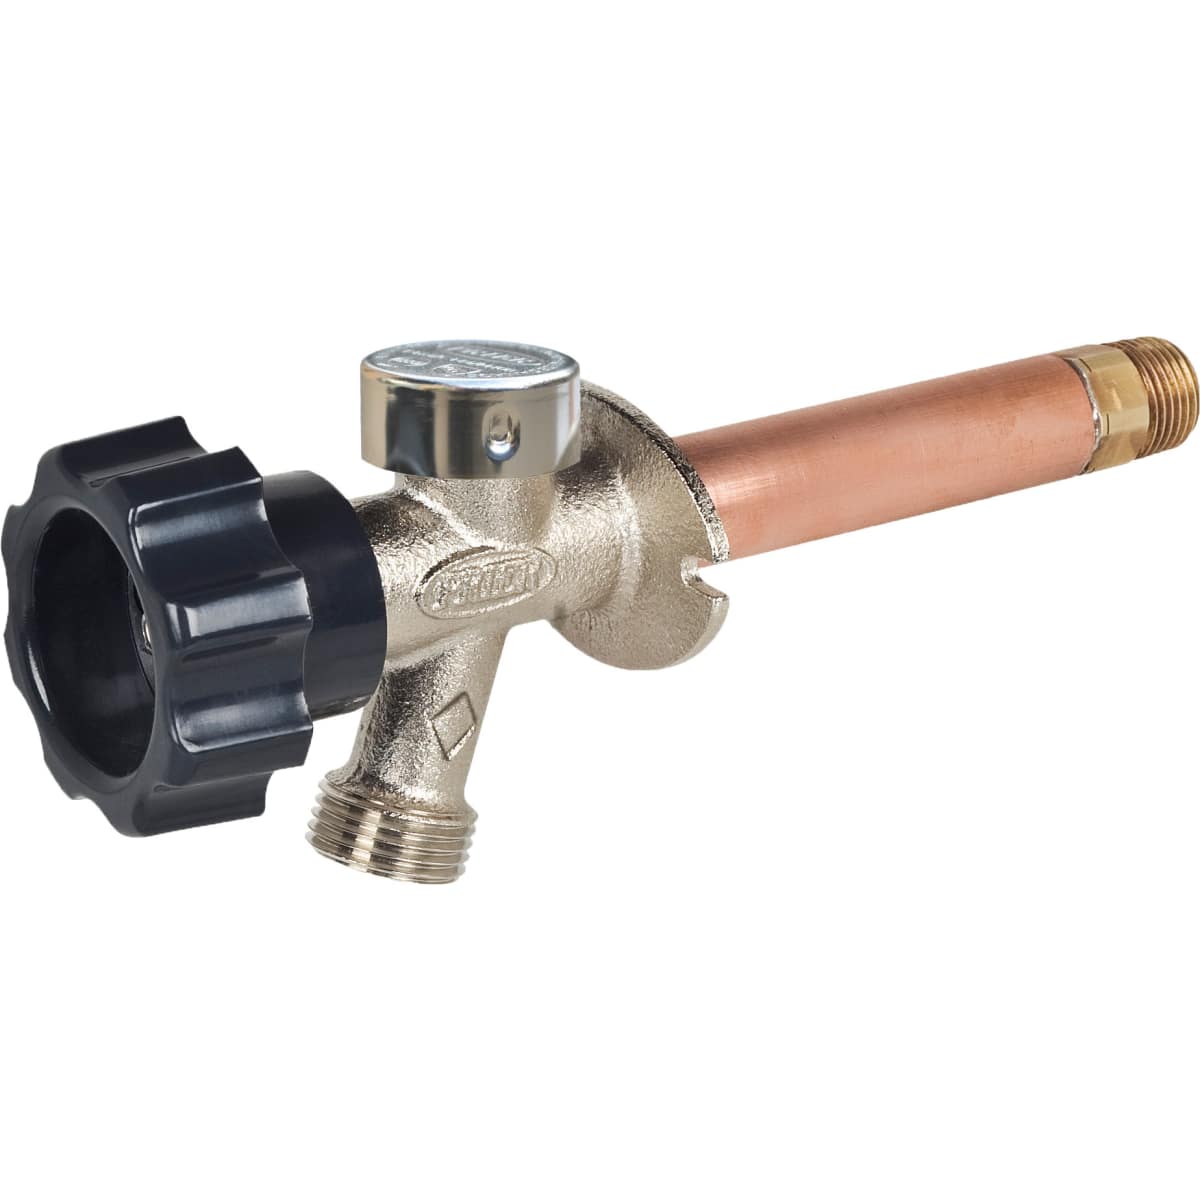 PRIER PRODUCTS C-108D04 4" Anti Siphon Hot and Cold Wall Hydrant with 1/2" Inl